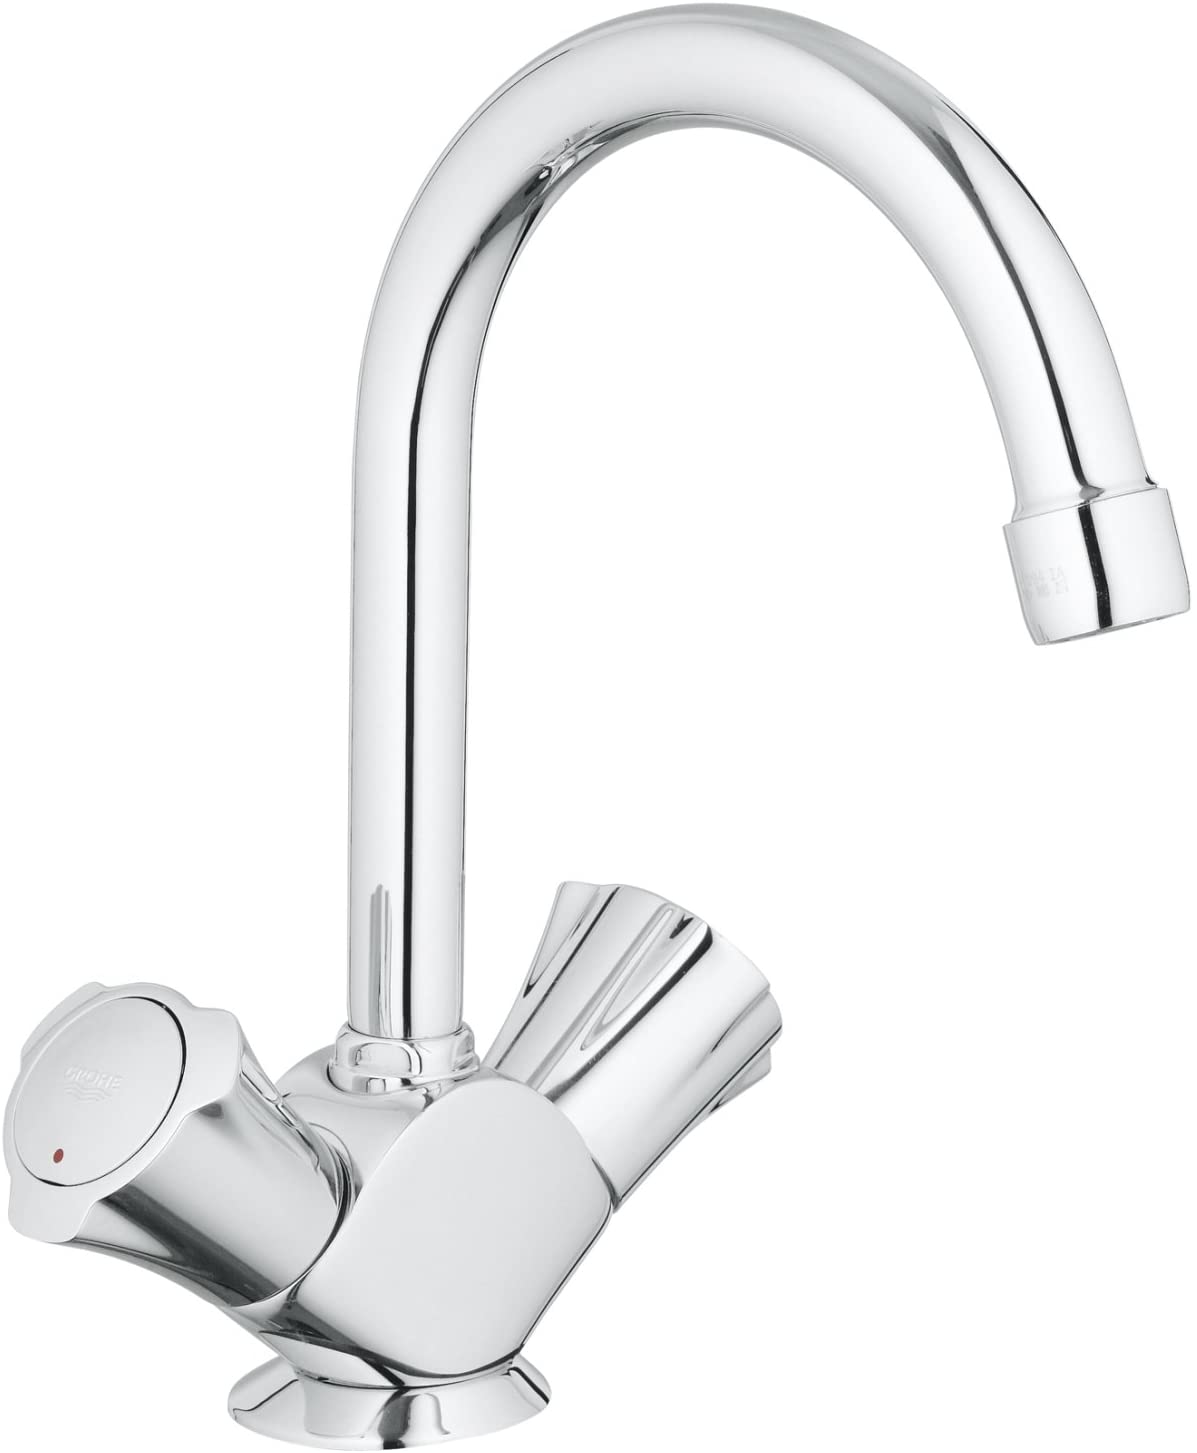 Grohe 21375001 Costa Single-Spout Bathroom Sink Tap DN 15 with Fittings Chrome